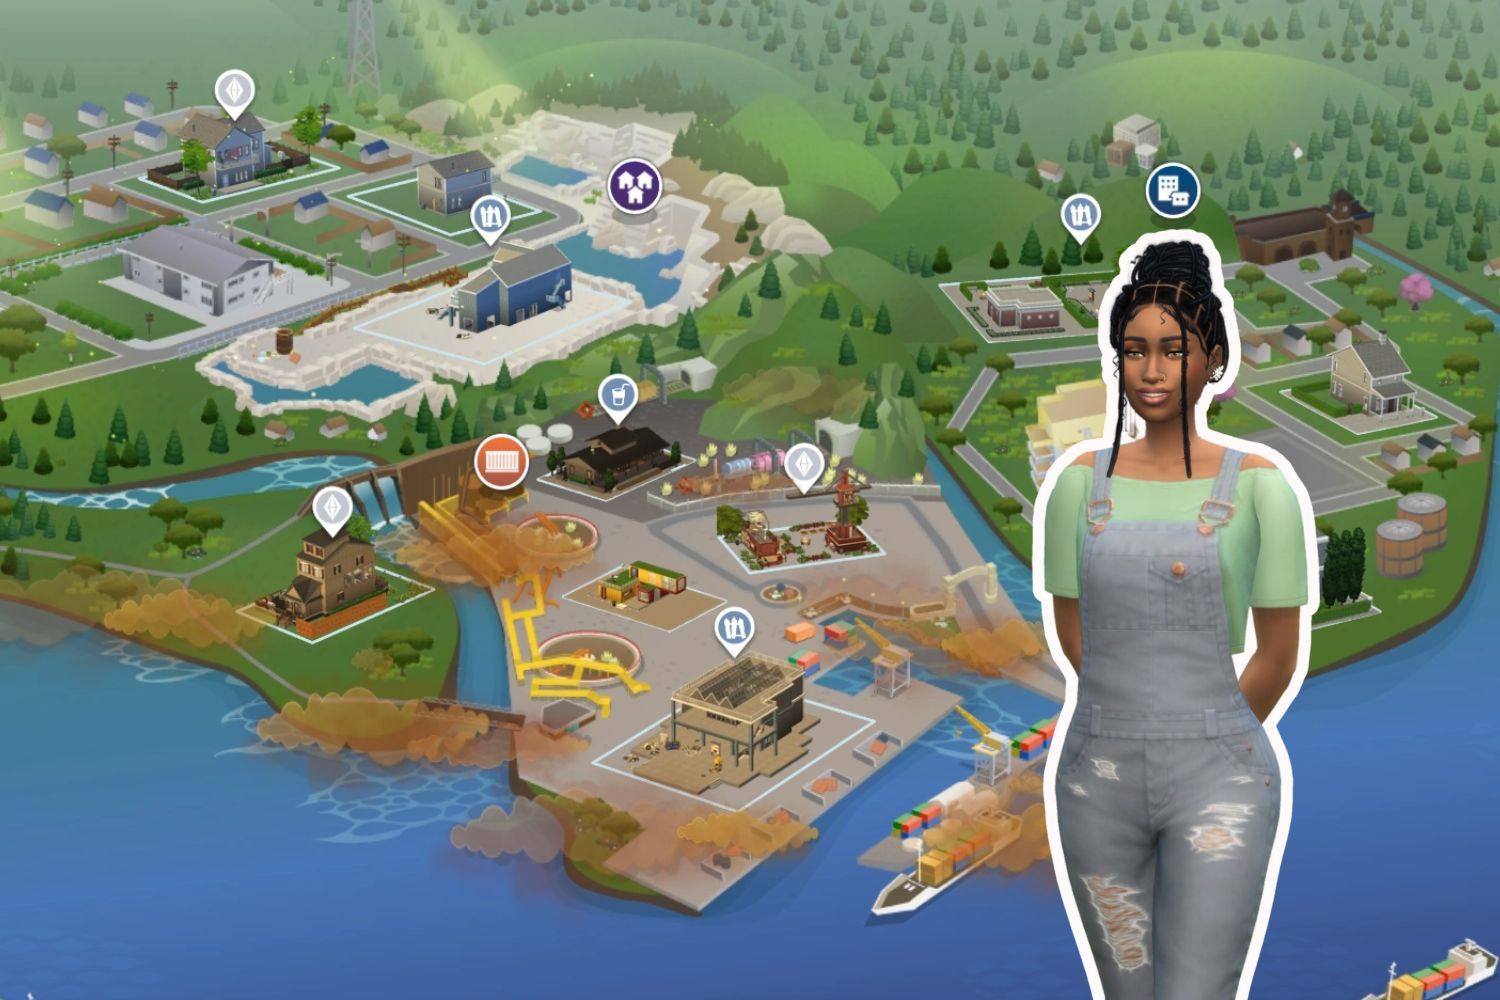 In overalls and a green tee shirt, the feminine Sim stands against a map of Evergreen Harbor.